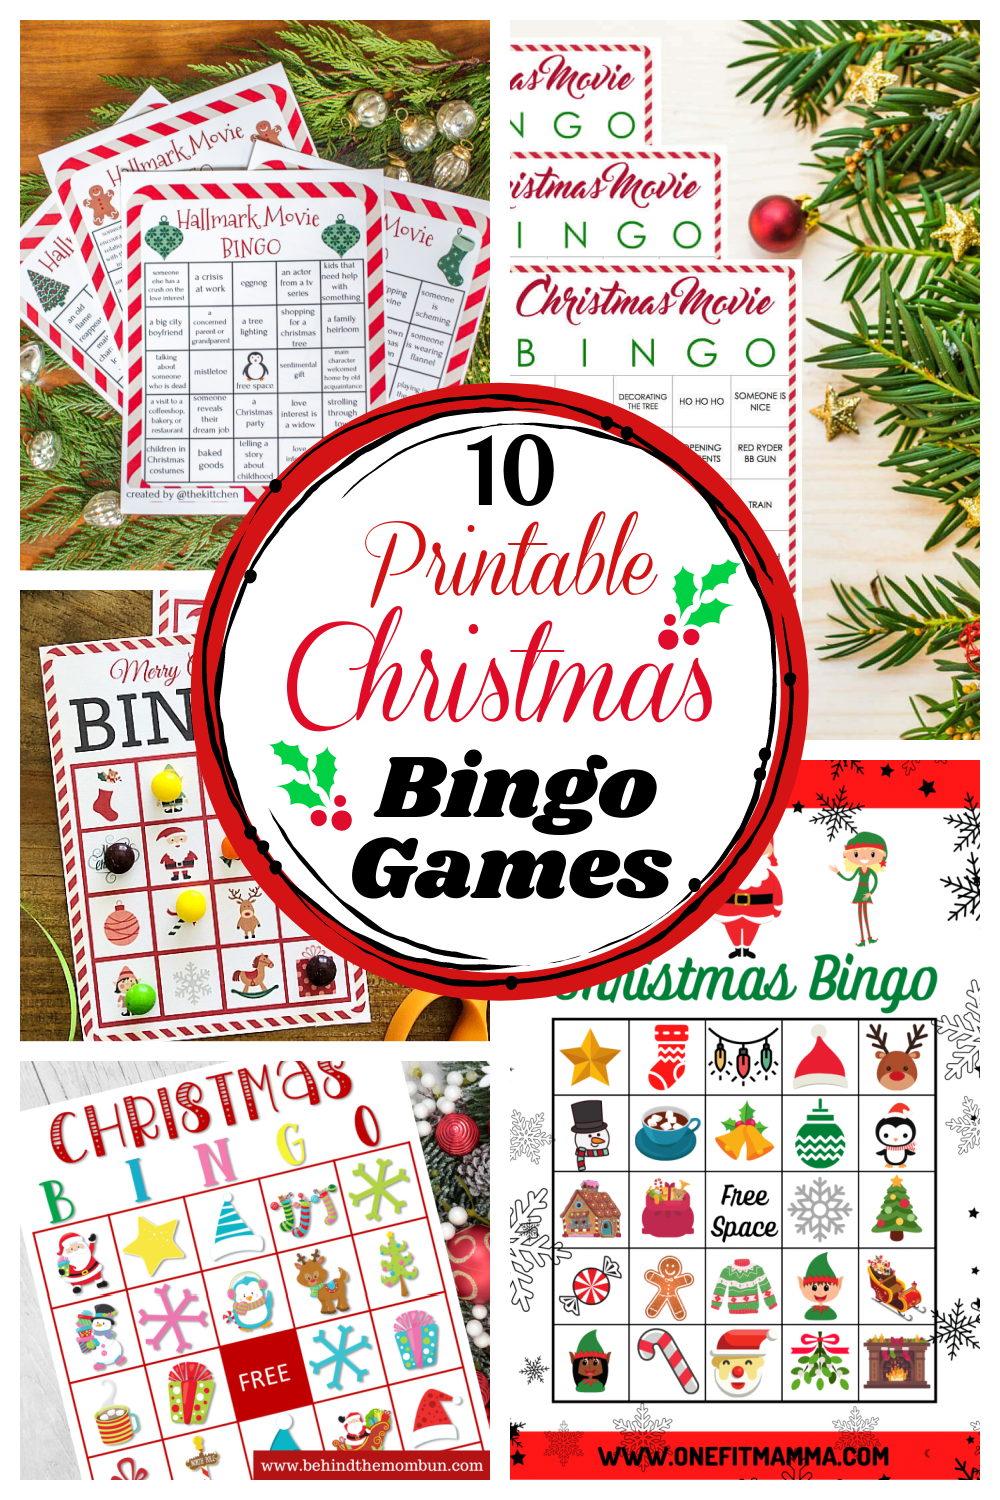 10 Free Printable Christmas Bingo. These 10 fun bingo boards are perfect for your next Christmas party. And the best part is that they are free and easy to print. #Christmasbingo #Christmasbingogames #printablebingoboards